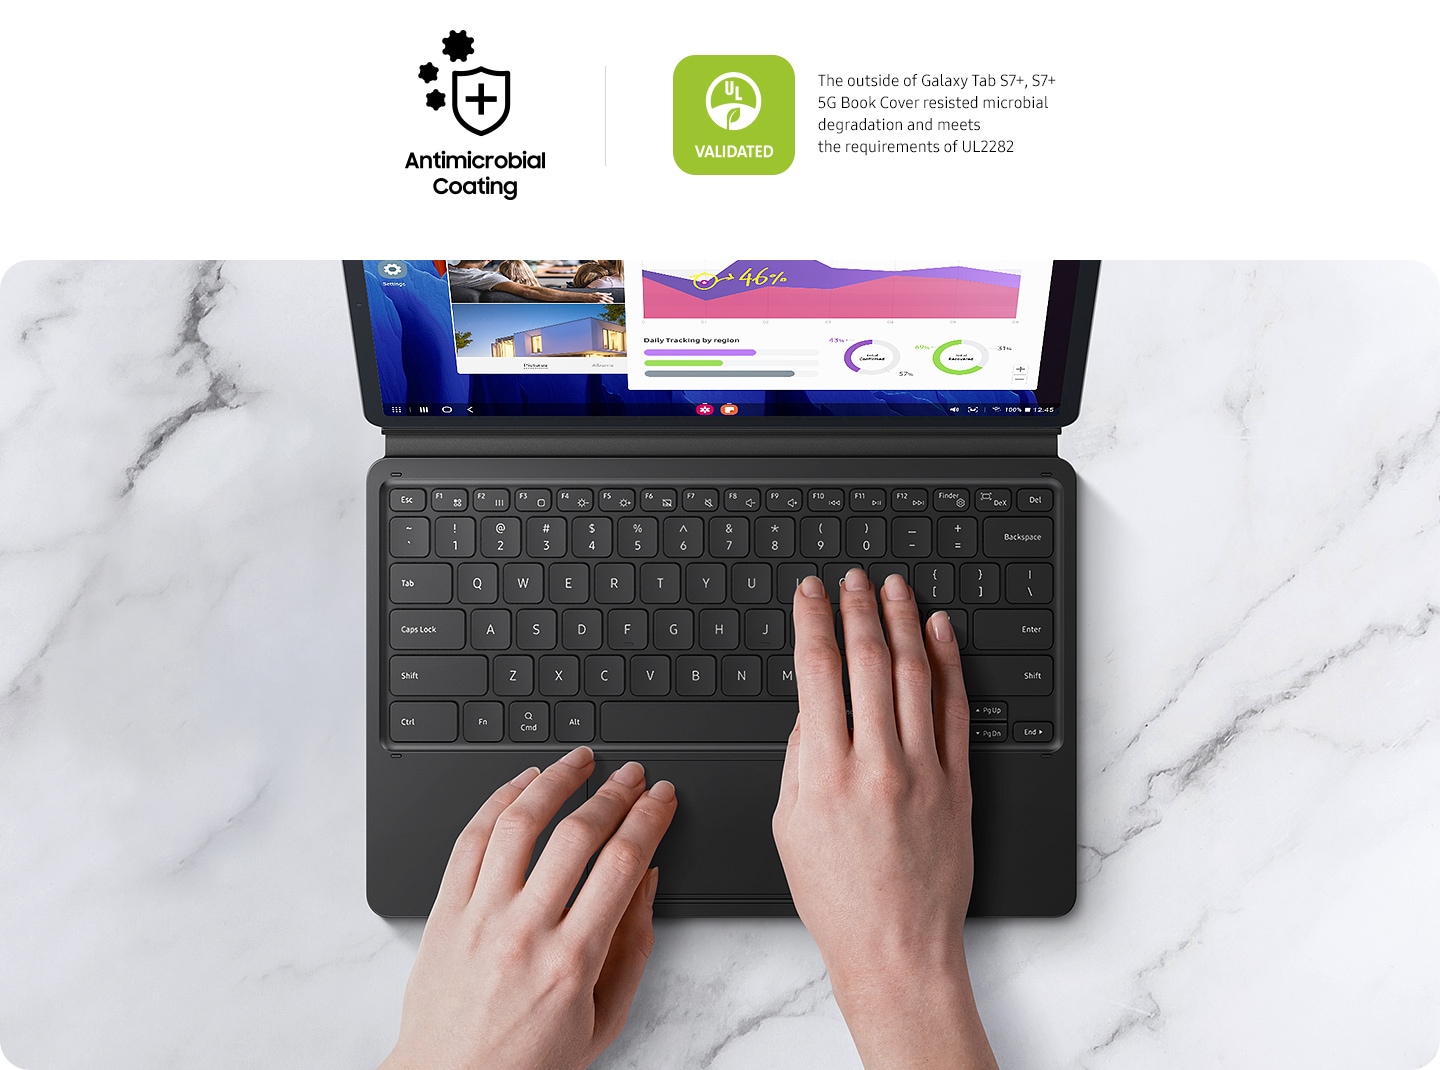 A person is using Tab S7+ book Cover keyboard with two hands you can see the two logos, Antimicrobial Coating and VALIDATED